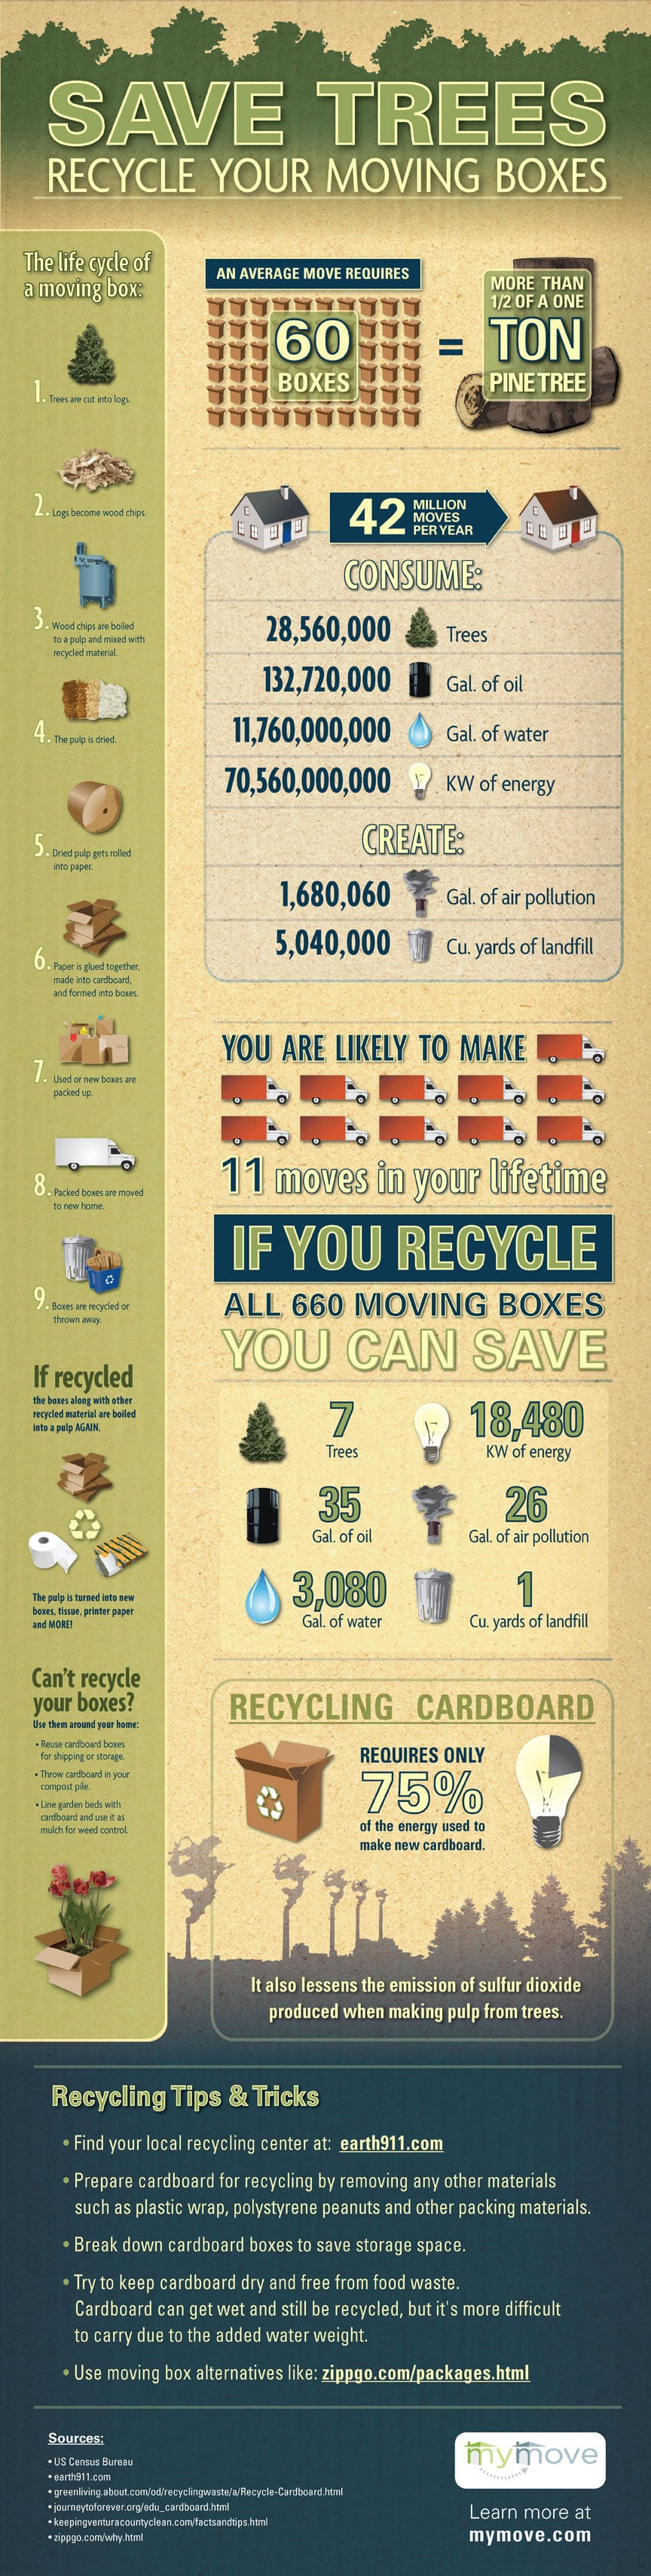 Save Trees and Recycle Your Moving Boxes Infographic